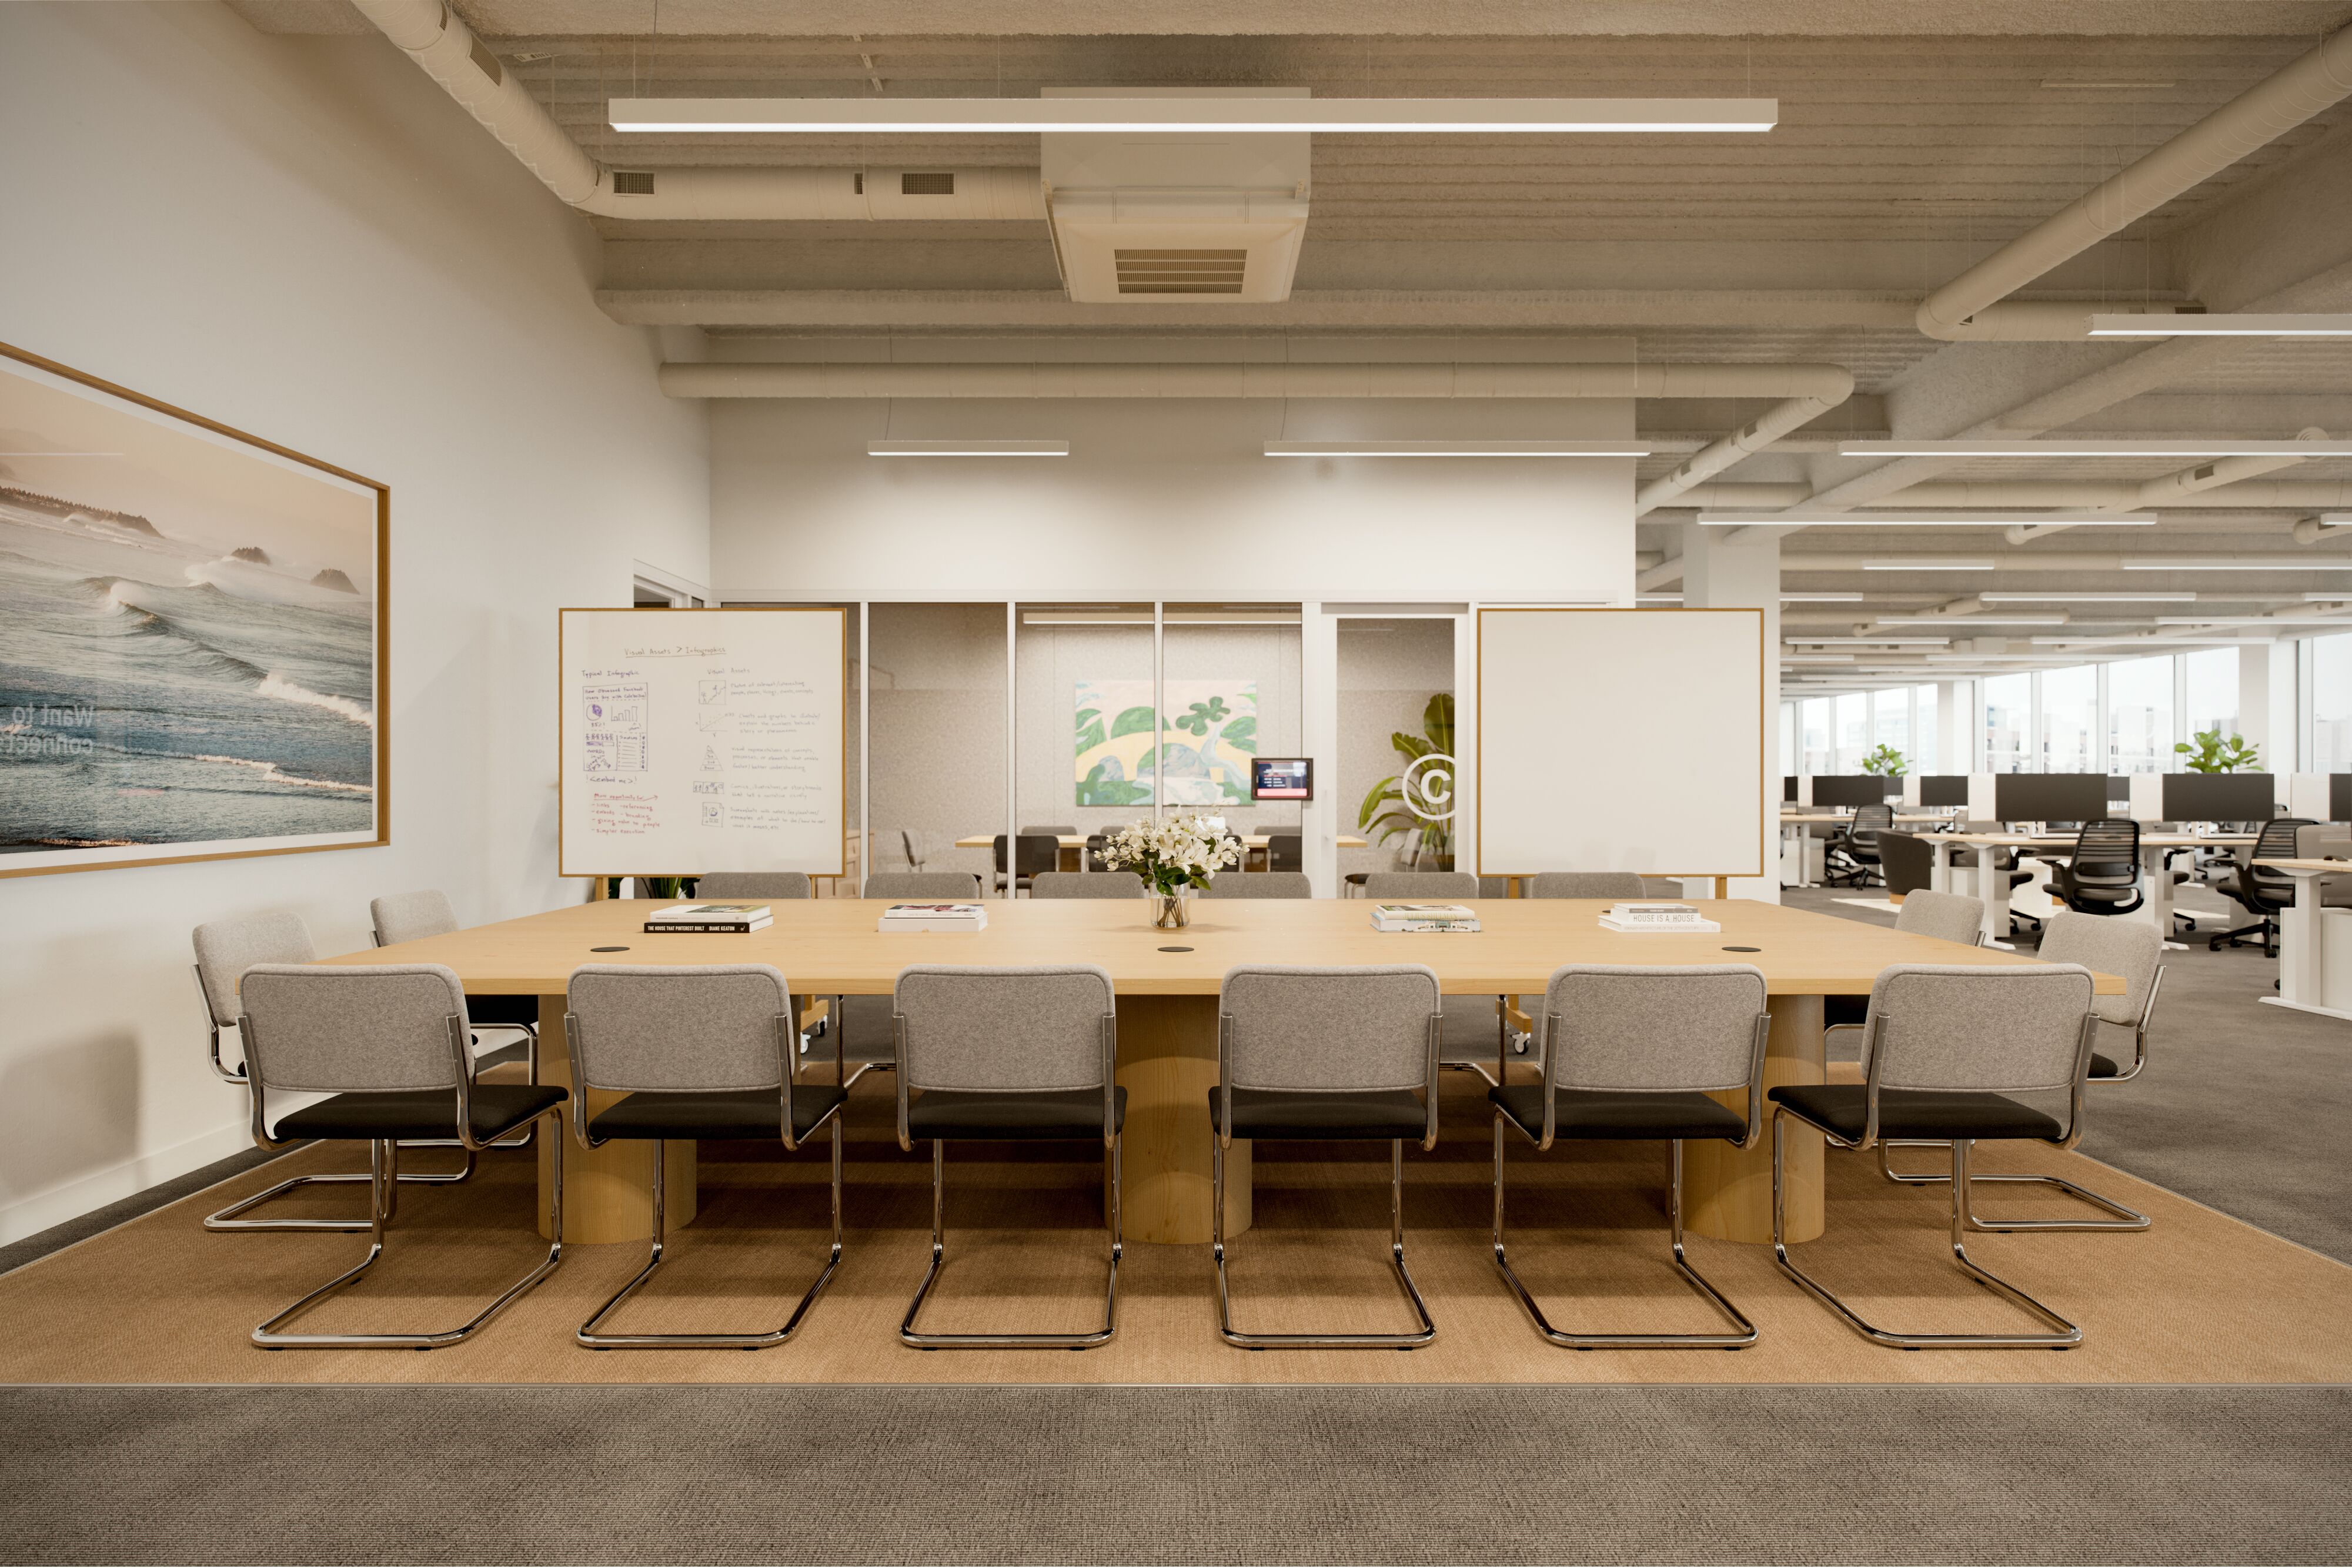 Rendering shown: Conference Room